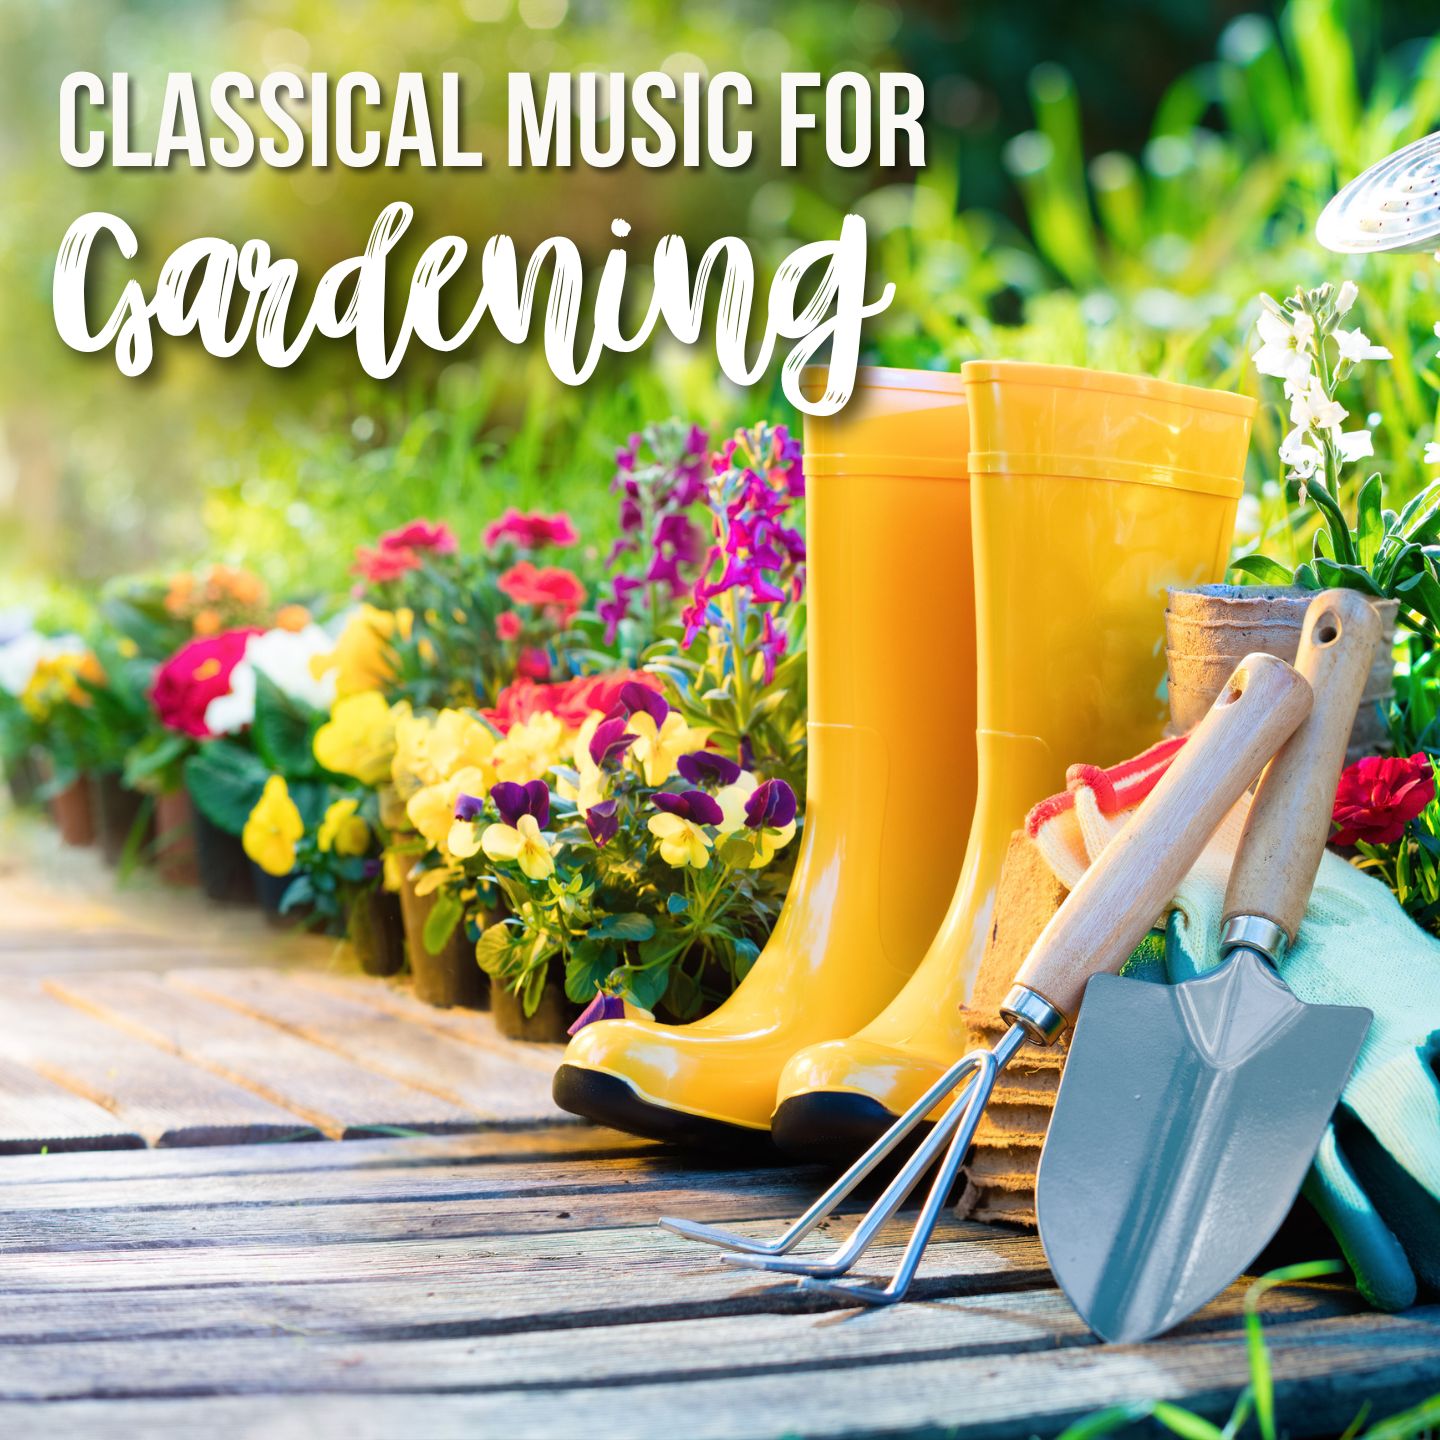 Classical Music for Gardening